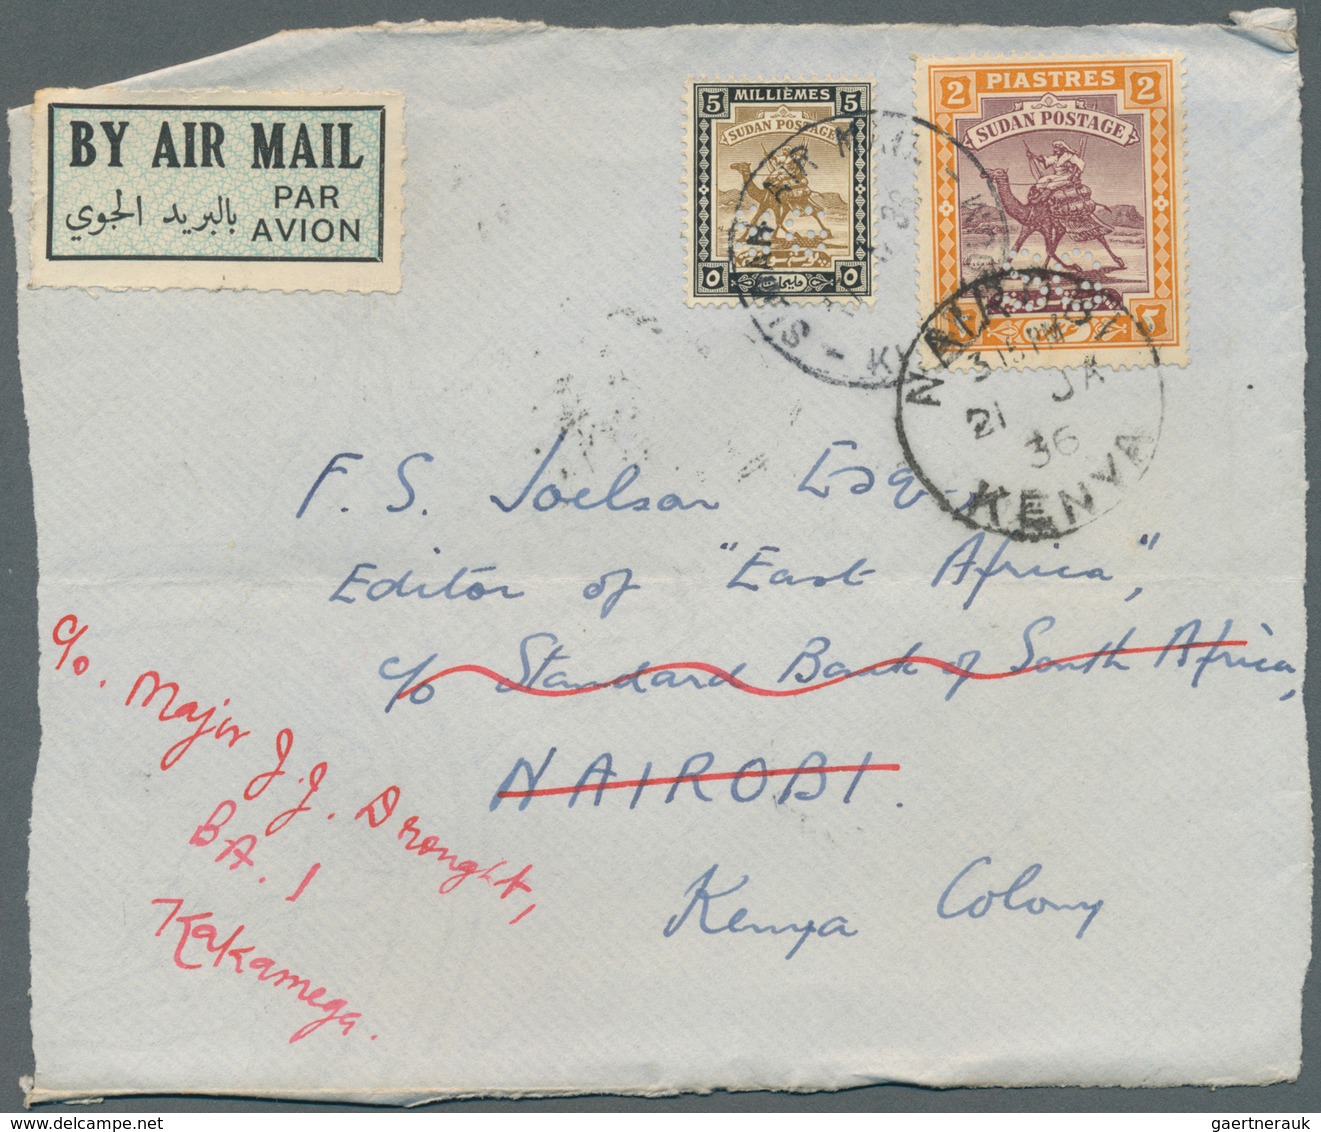 Sudan - Dienstmarken Regierung: 1936/49, airmail covers to London franked up to 10 Sh (5), plus fron